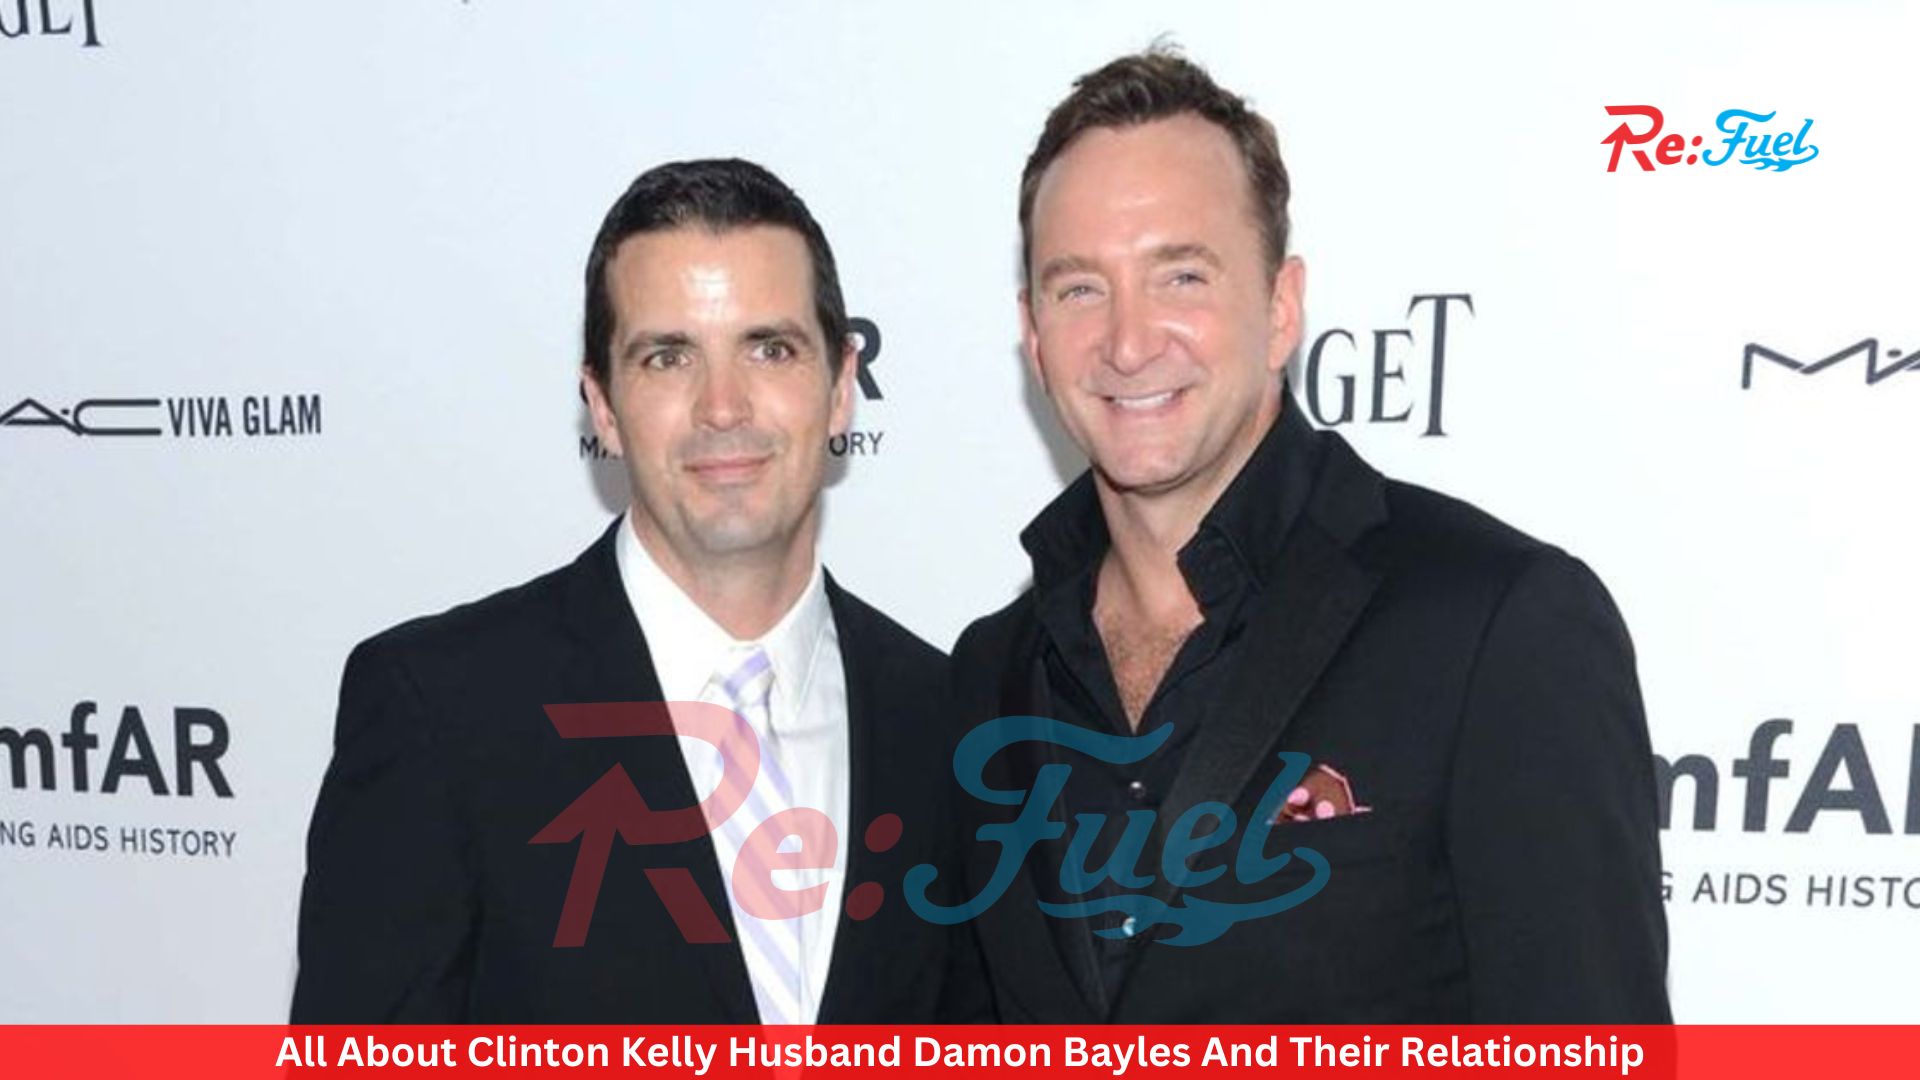 All About Clinton Kelly Husband Damon Bayles And Their Relationship